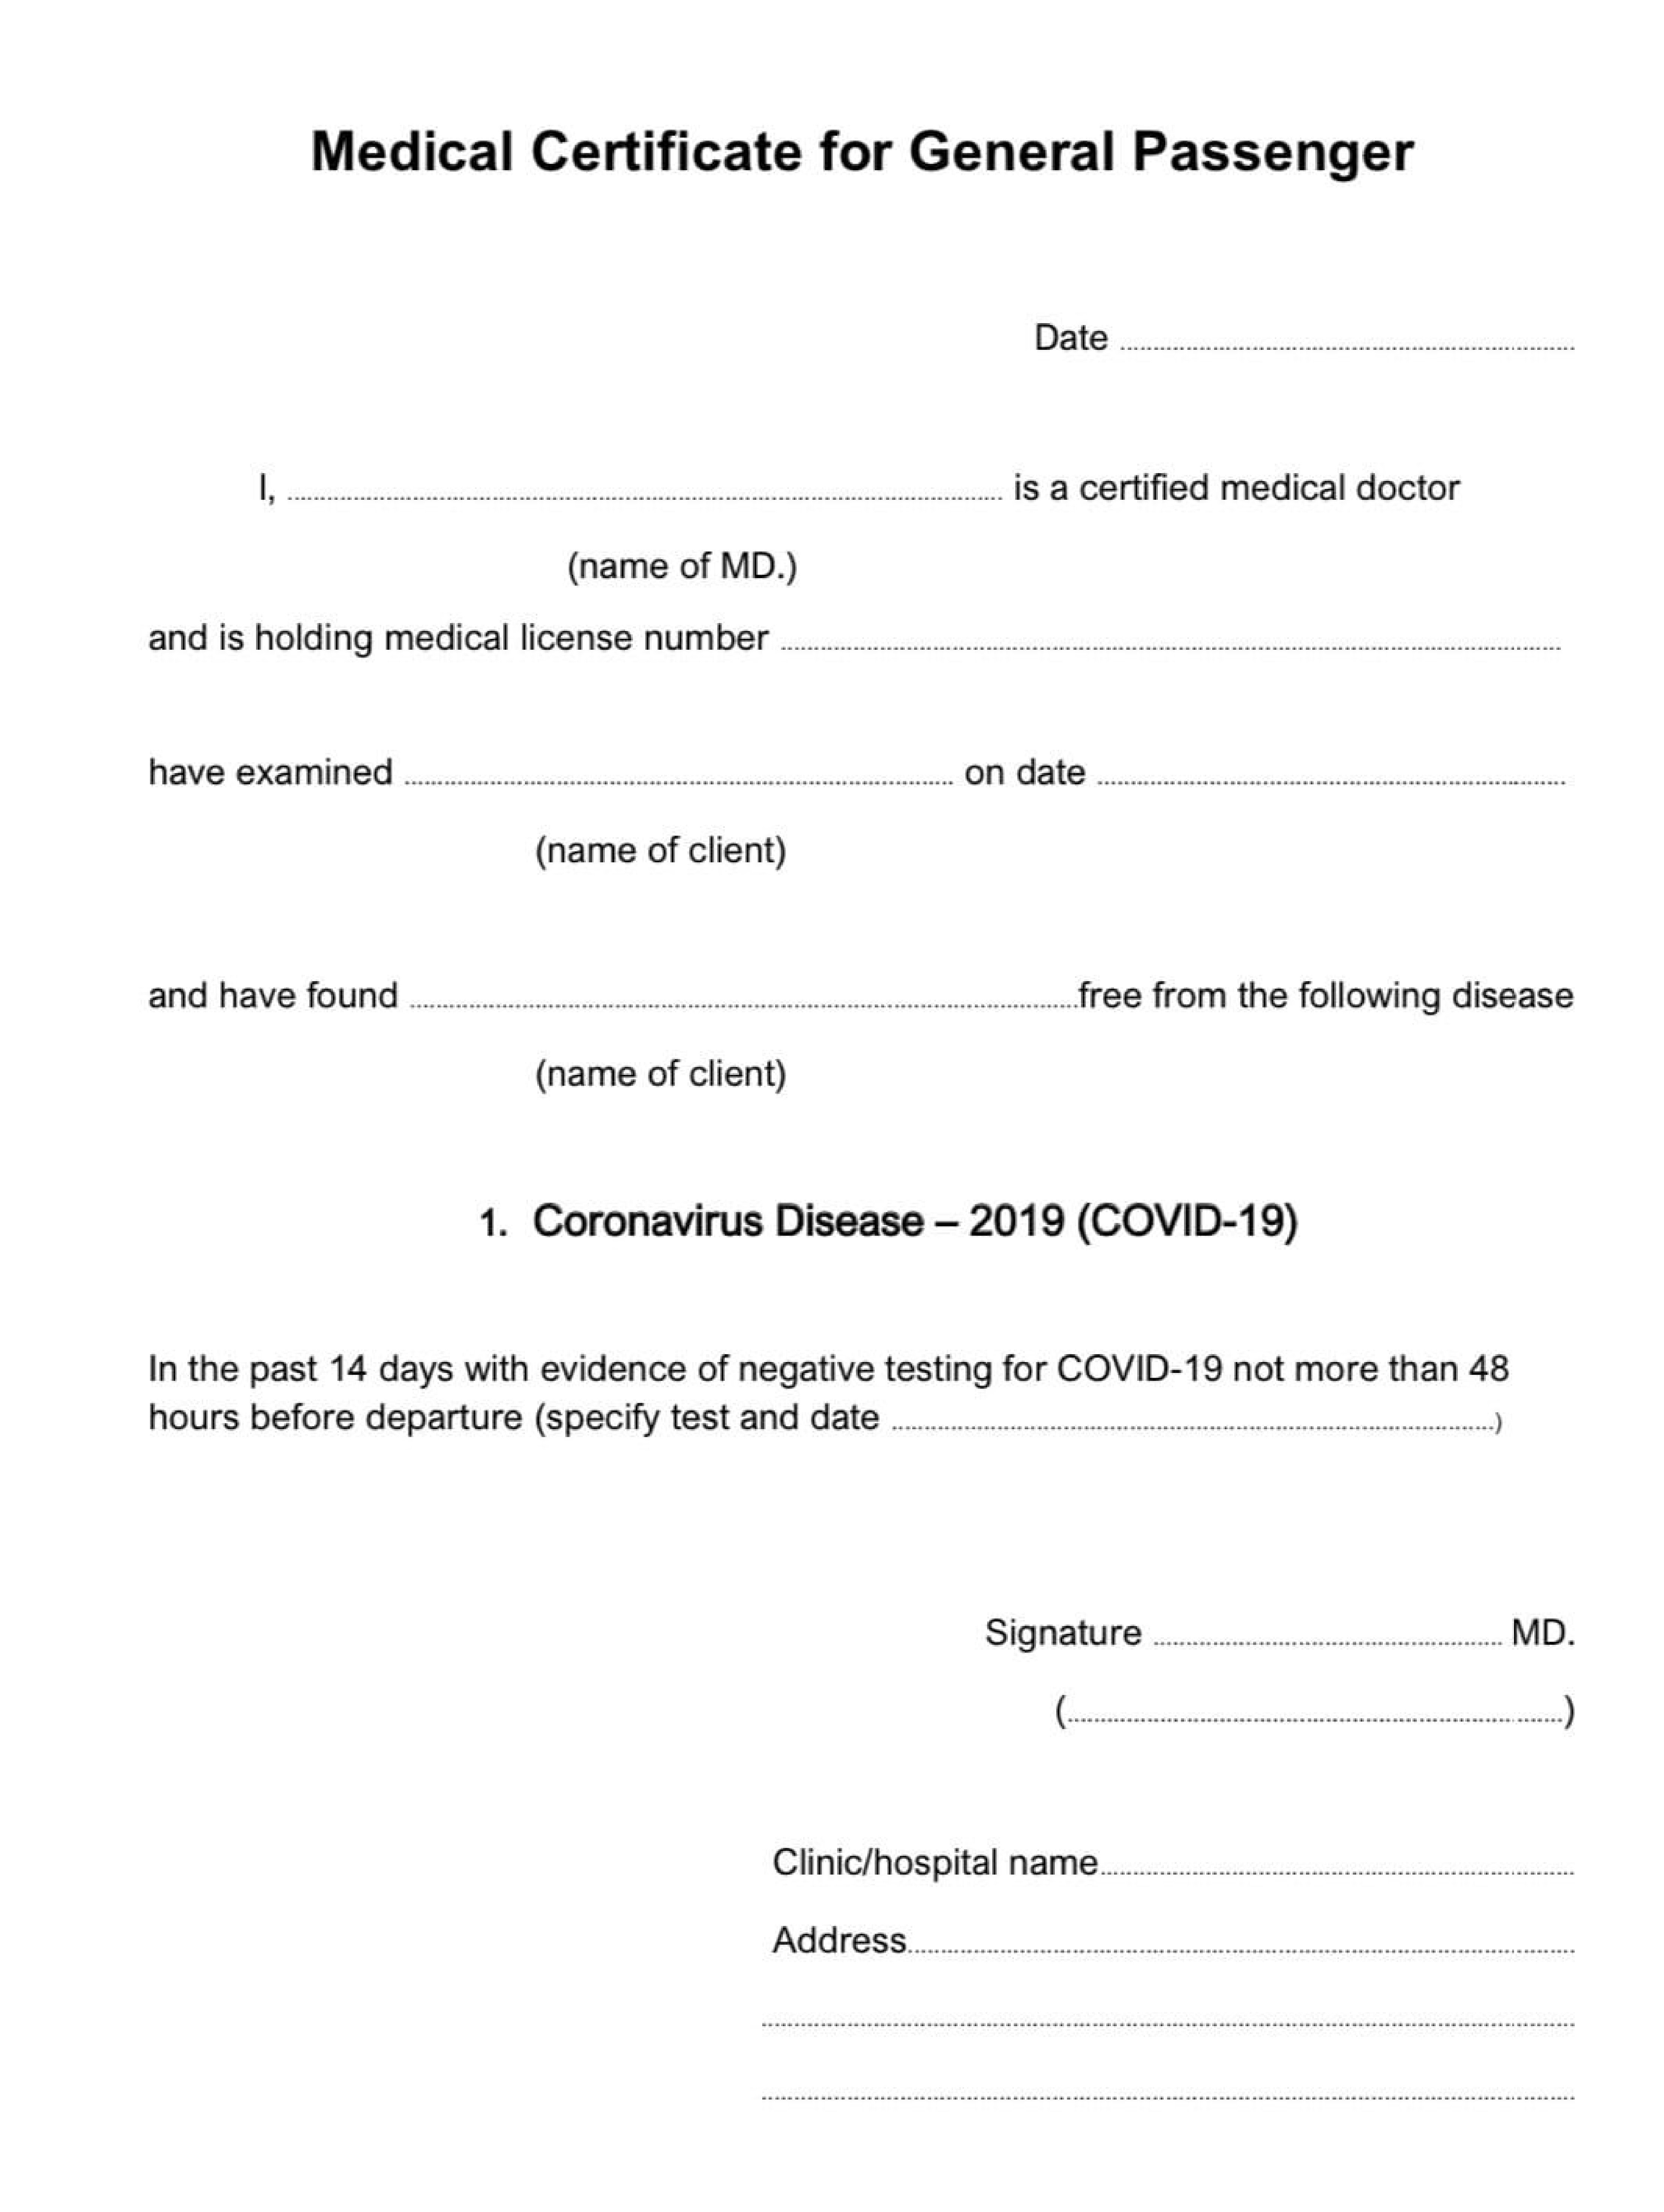 COVID19 Medical Certificate Fit To Fly Templates At